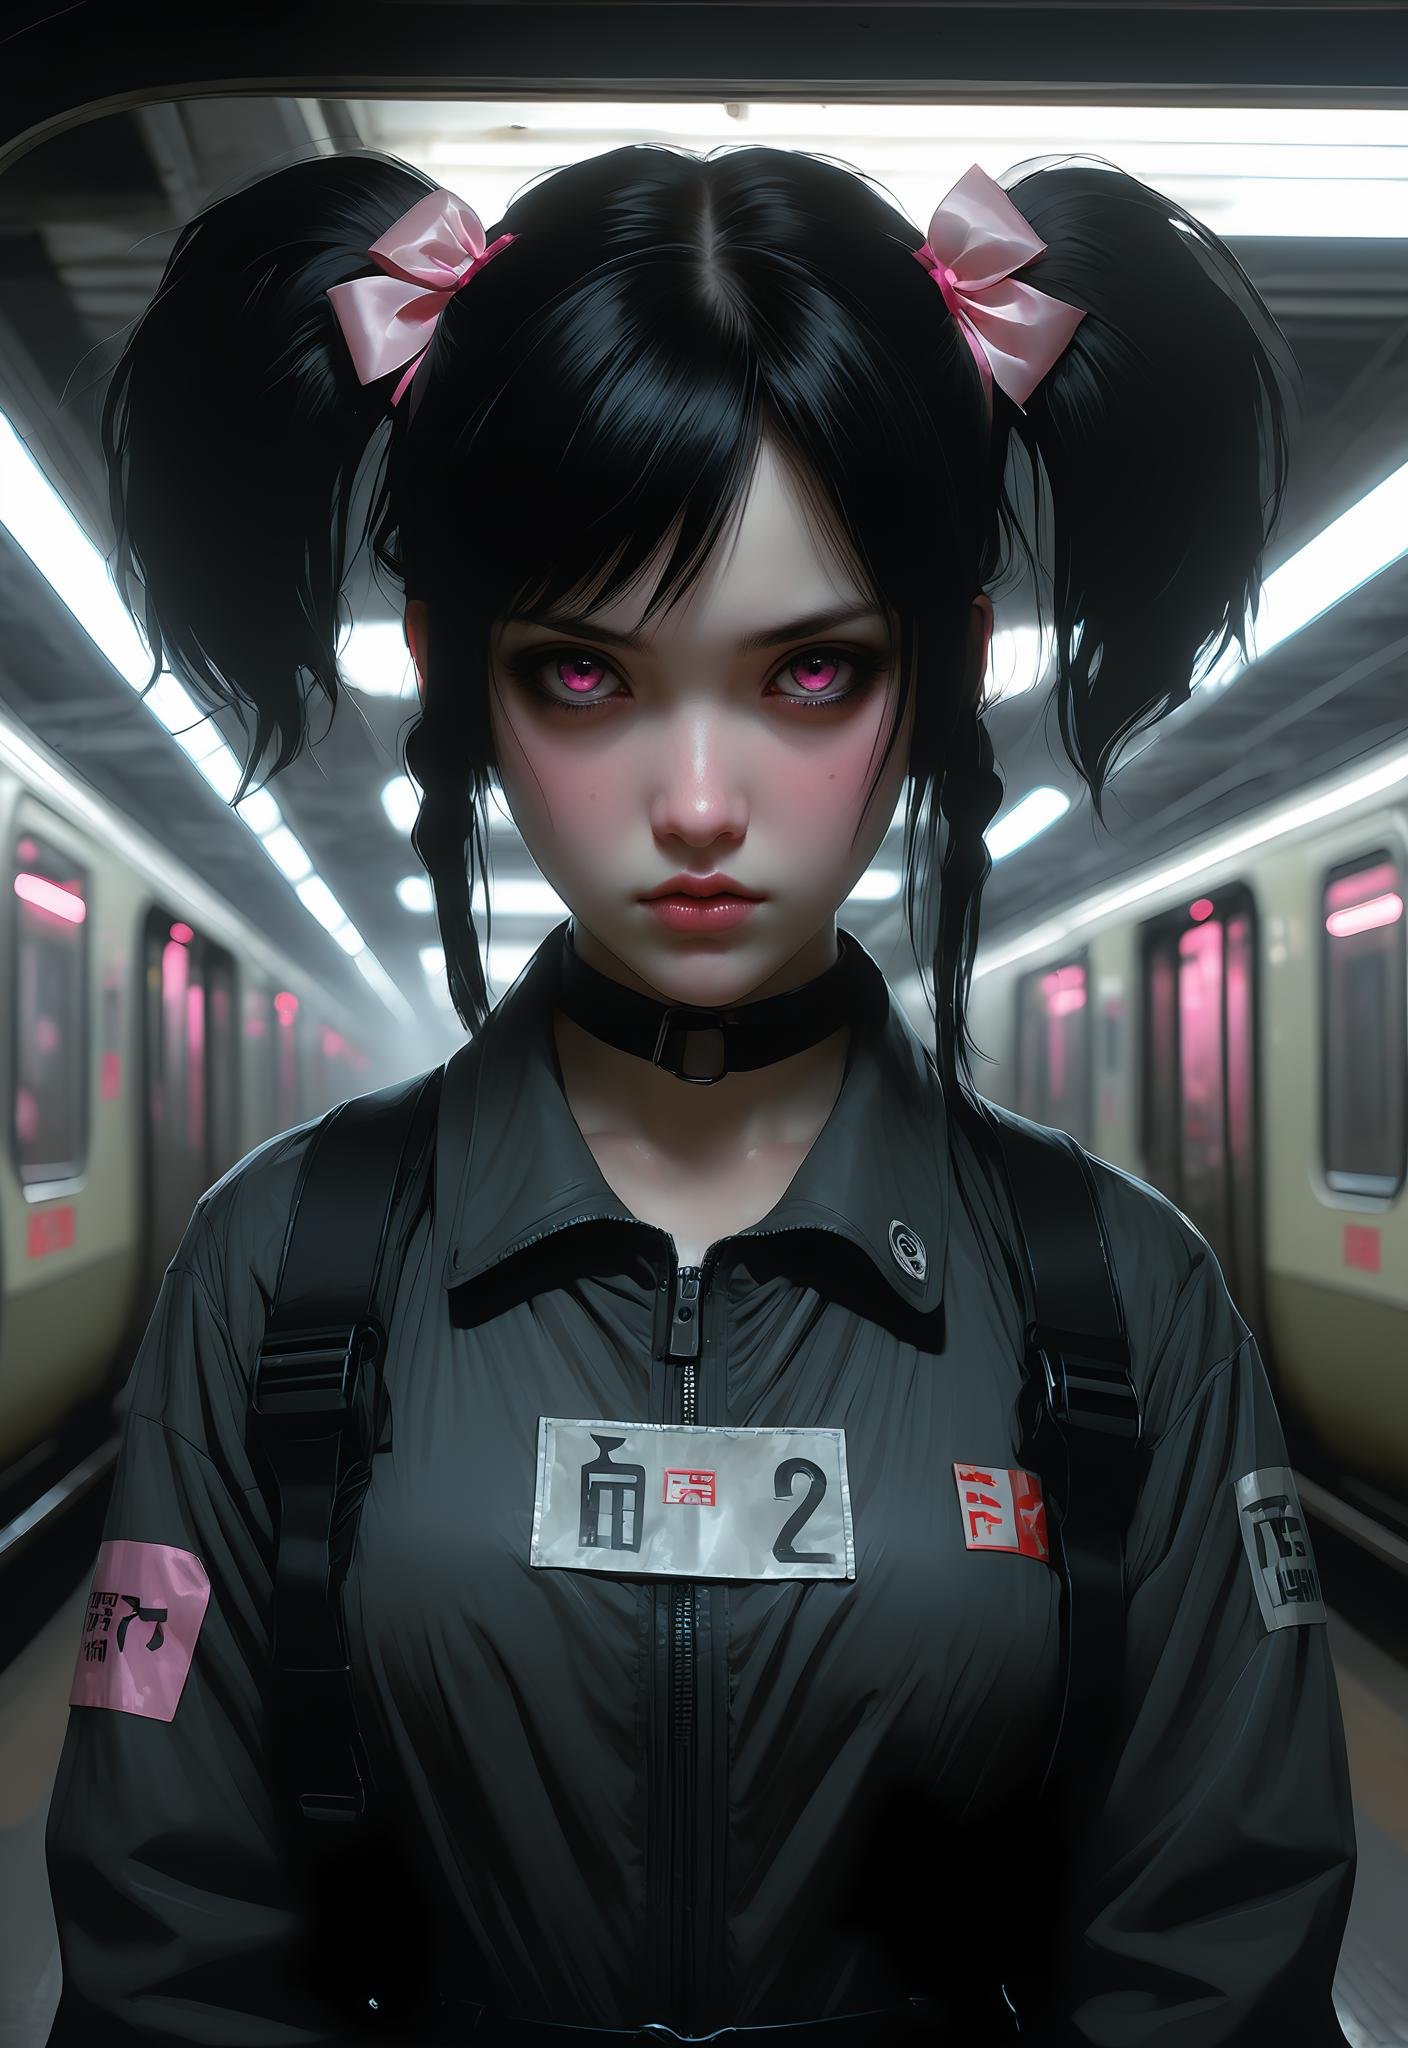 Darkness, horror, creepy, Impressionist Anime painting, metro 2033, disease, mine - type, mass - produced type, cross, slanted eyes, thick coating, twintails, ribbon, black hair, pink eyes, on metro station interior, horror movie atmosphere, dramatic light atmosphere, by Malcolm Liepke, Casey Baugh, jujin ito, and Nick Alm